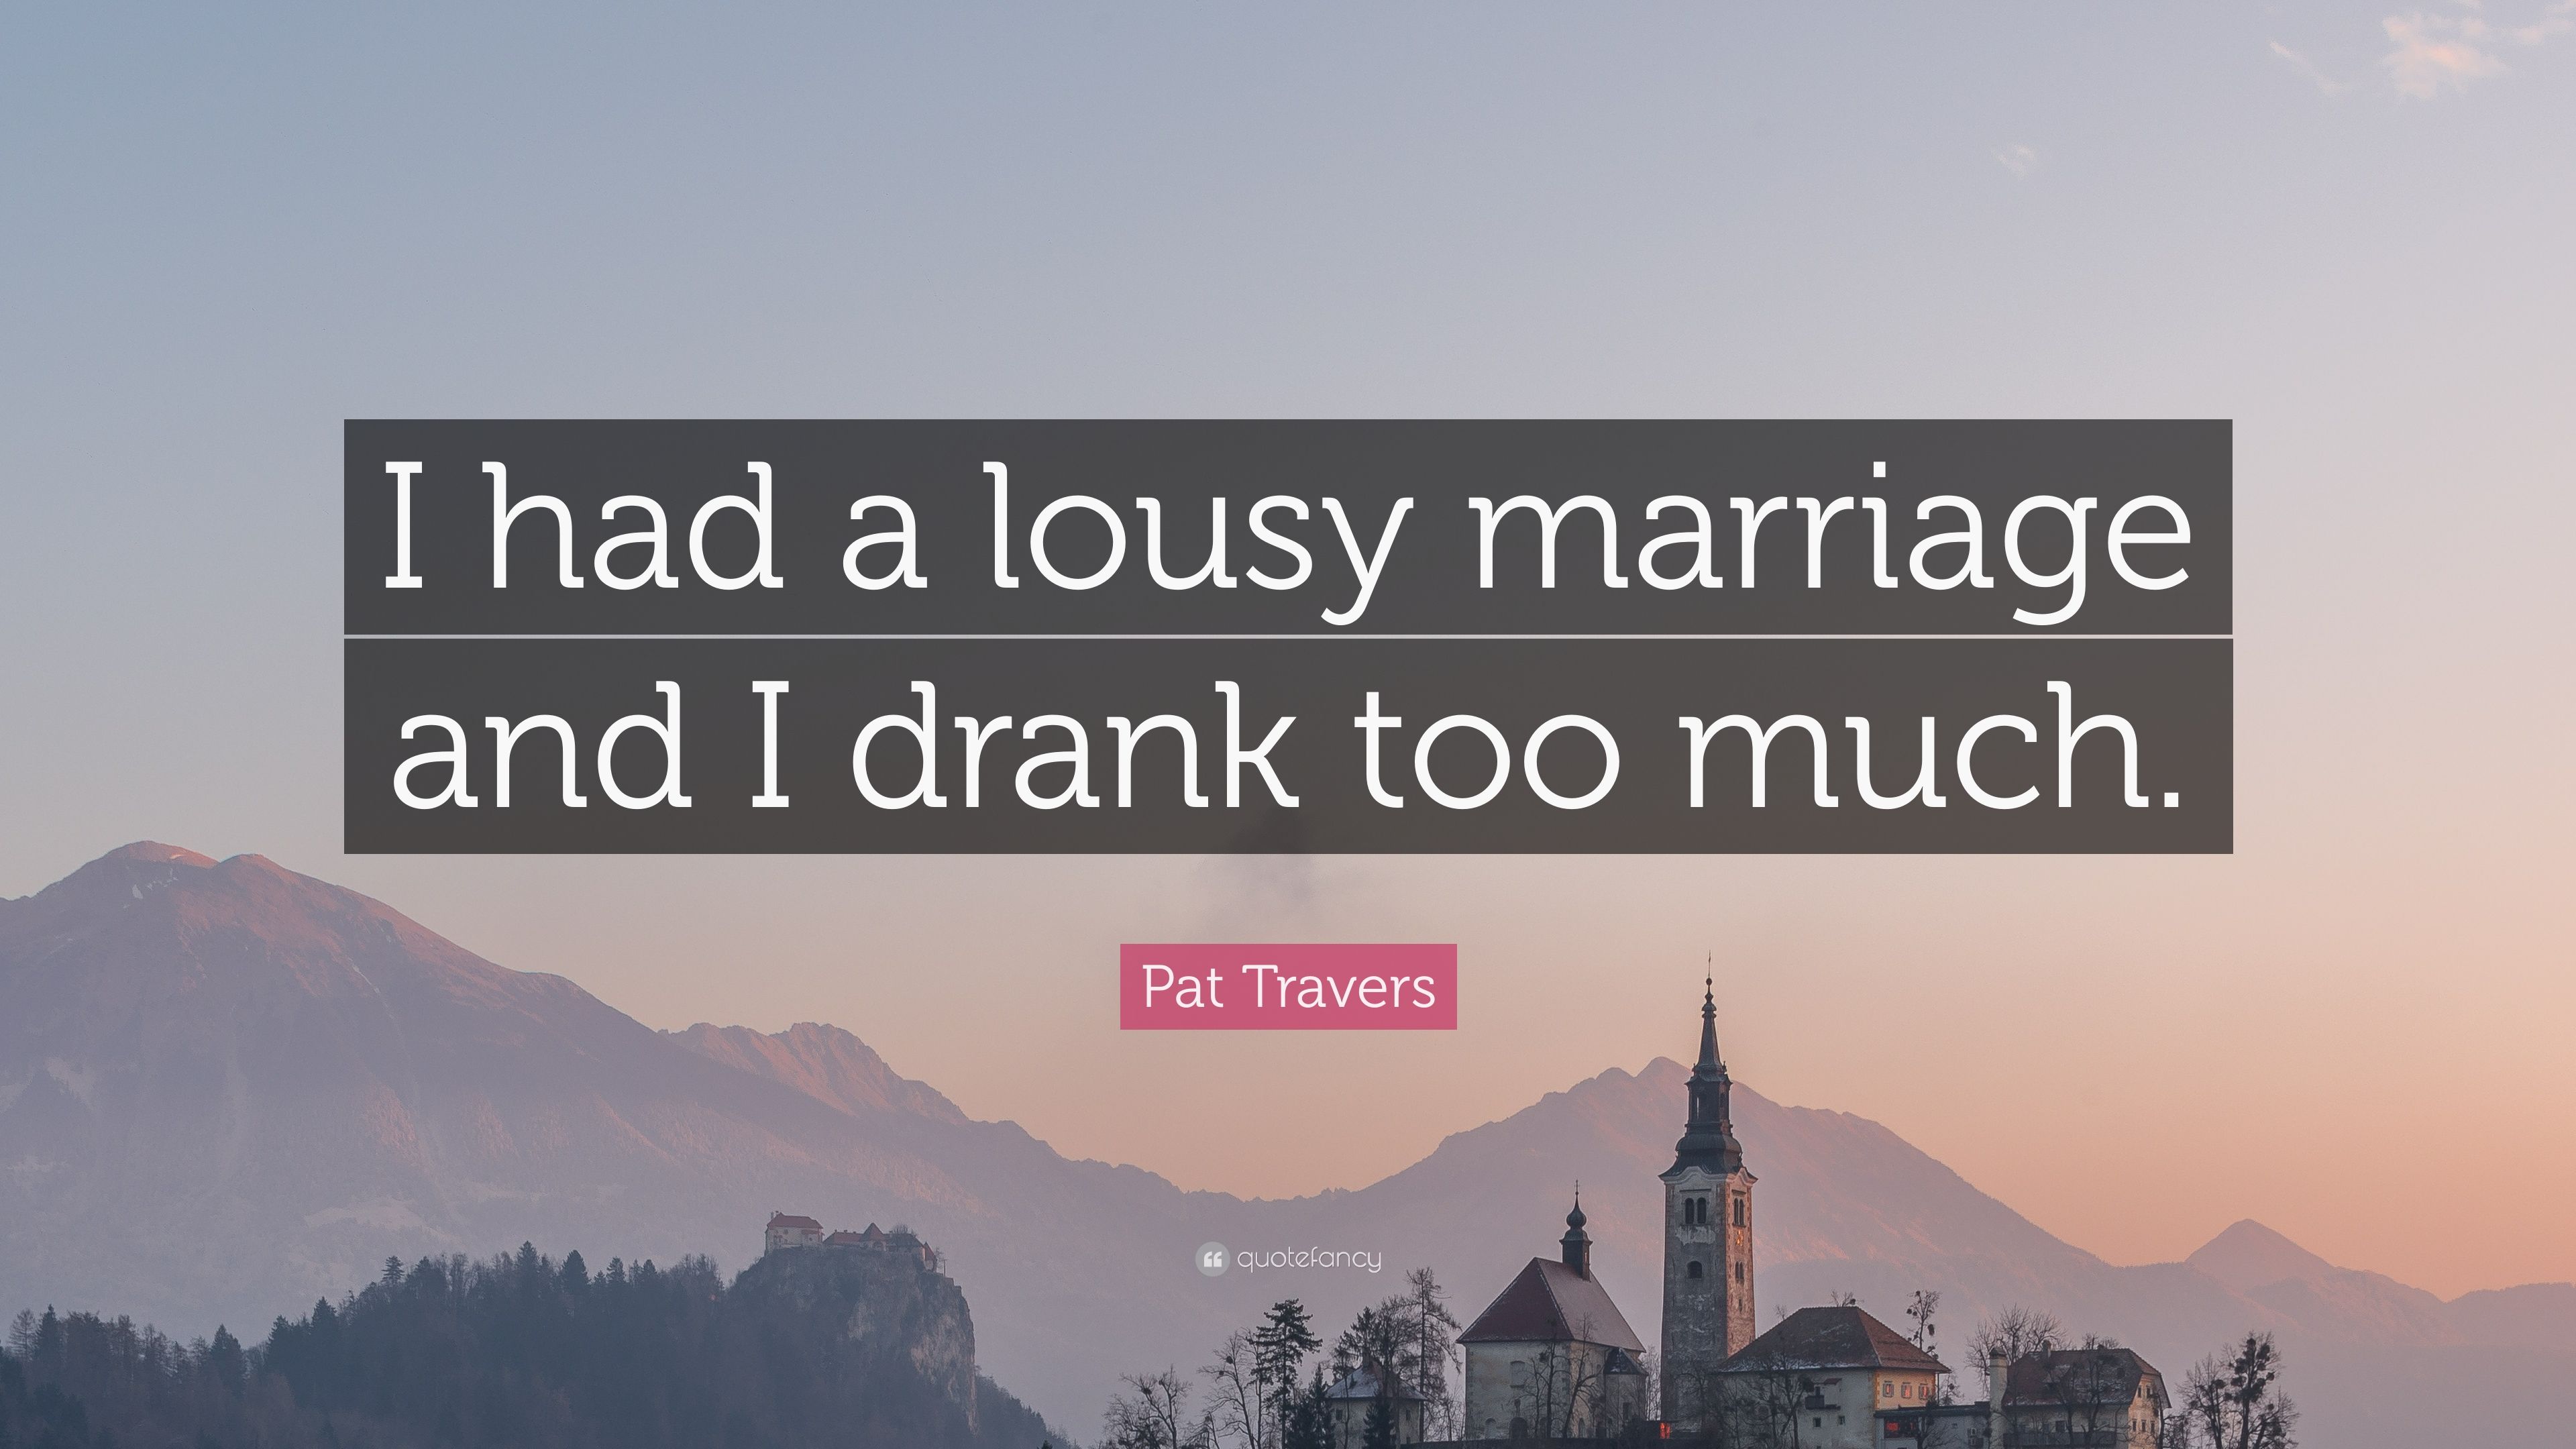 Pat travers quote âi had a lousy marriage and i drank too muchâ